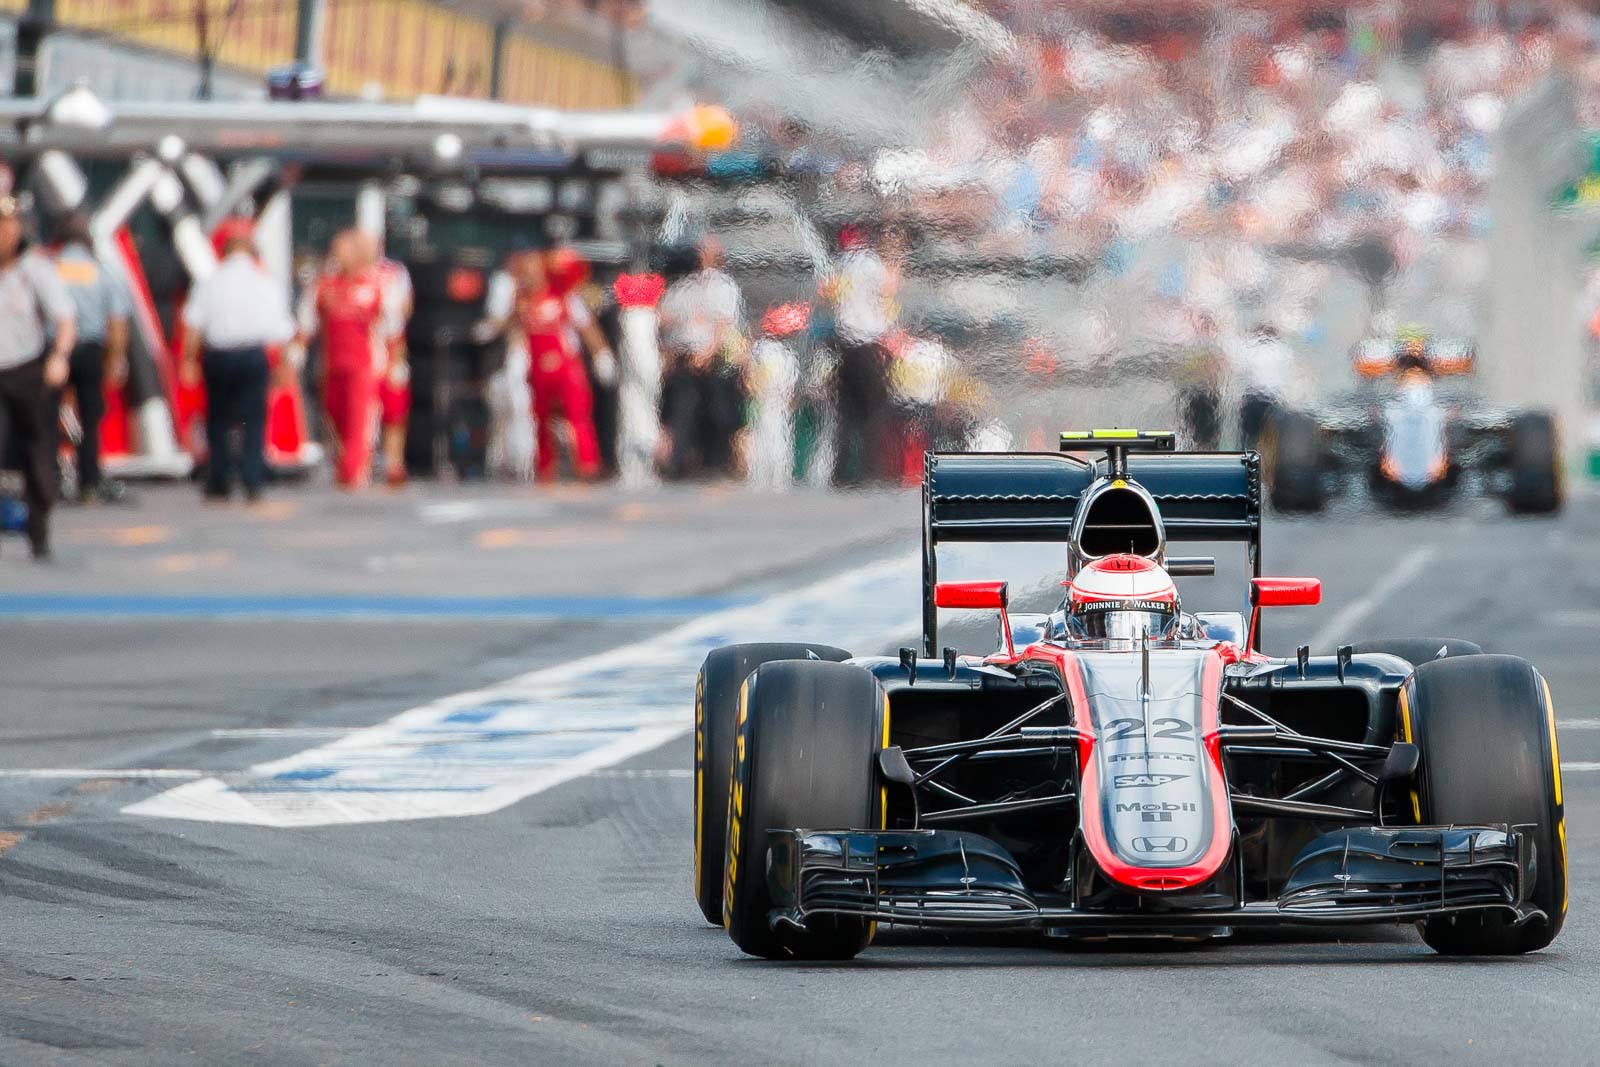 Formula One: March 14, 2015: Jenson Button (GBR) #22 from the McLaren Honda team leaves the pits for qualification at the 2015 Australian Formula One Grand Prix at Albert Park, Melbourne, Australia. Photo Sydney Low